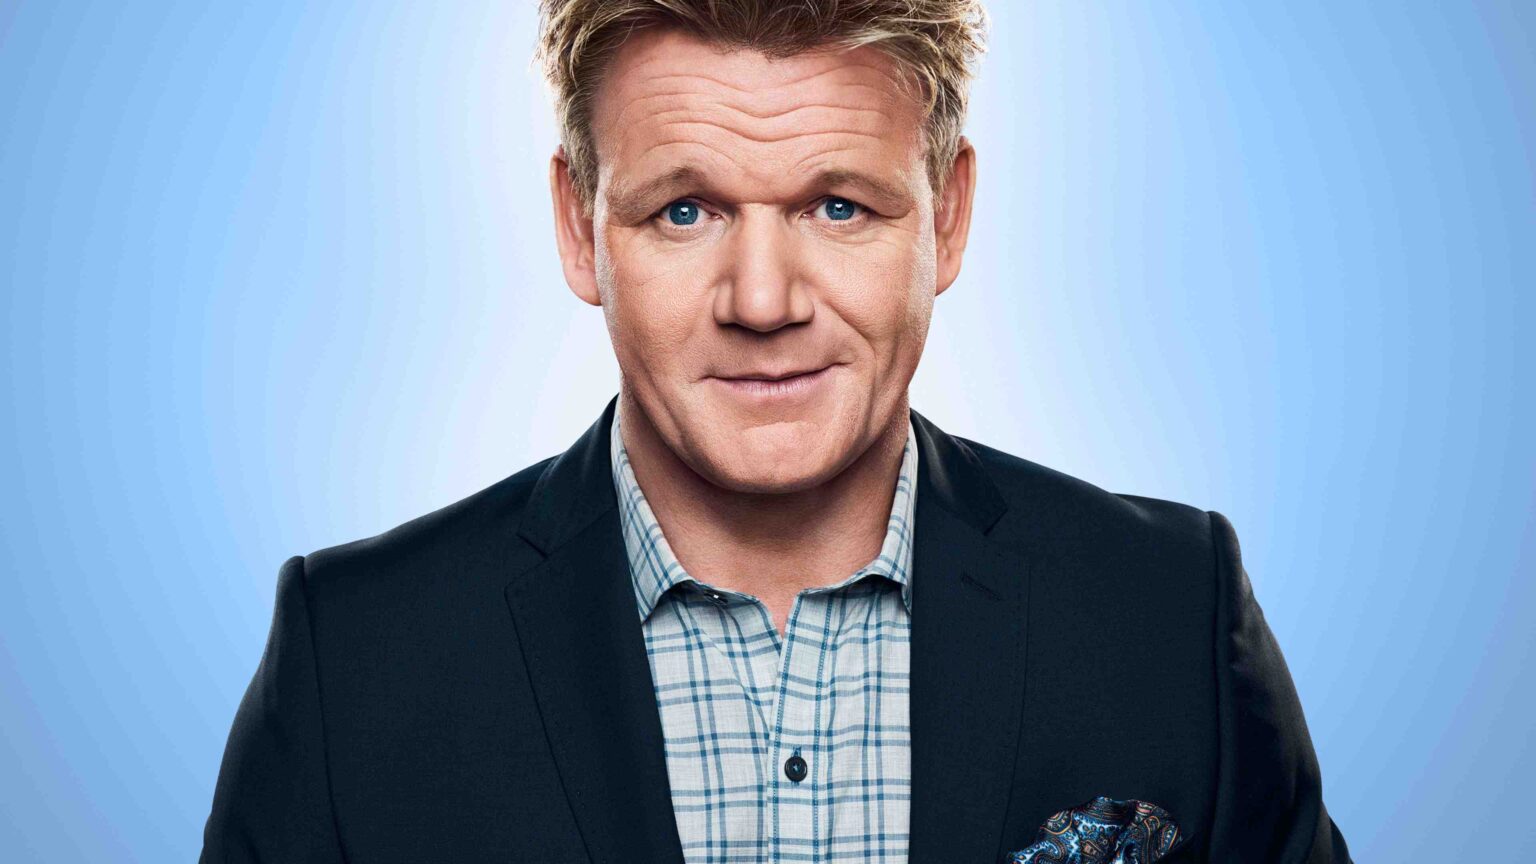 Is Chef Gordon Ramsay's fiery tongue scorching his fortune? Discover the sizzling truth about the 'gordon ramsay net worth' amid his kitchen controversies. Ready, set, whisk!